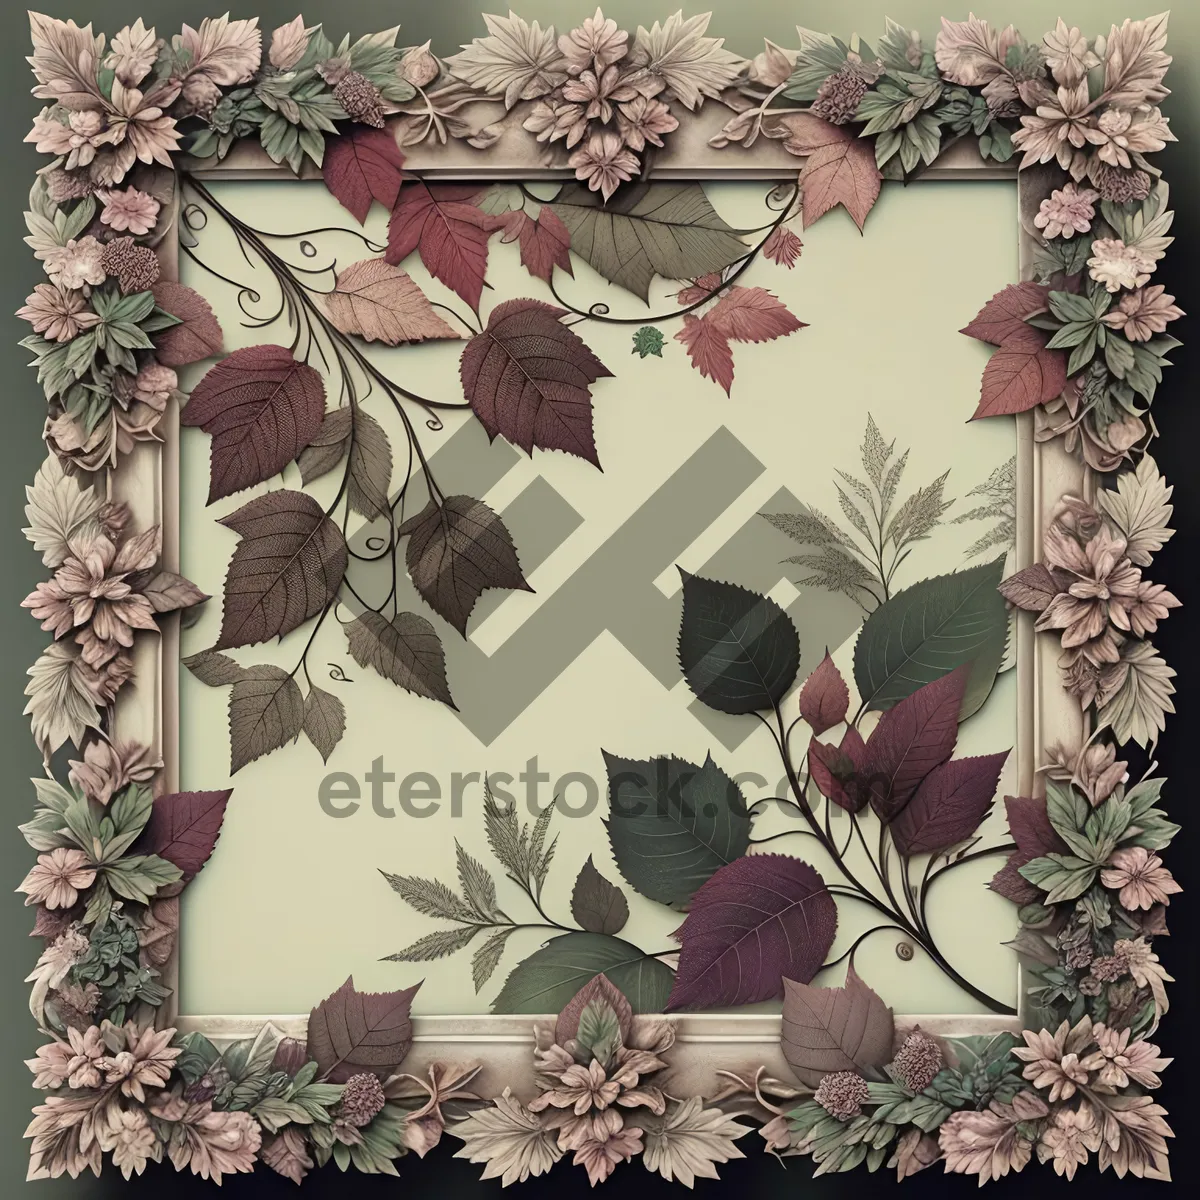 Picture of Vintage Floral Cushion with Grunge Design